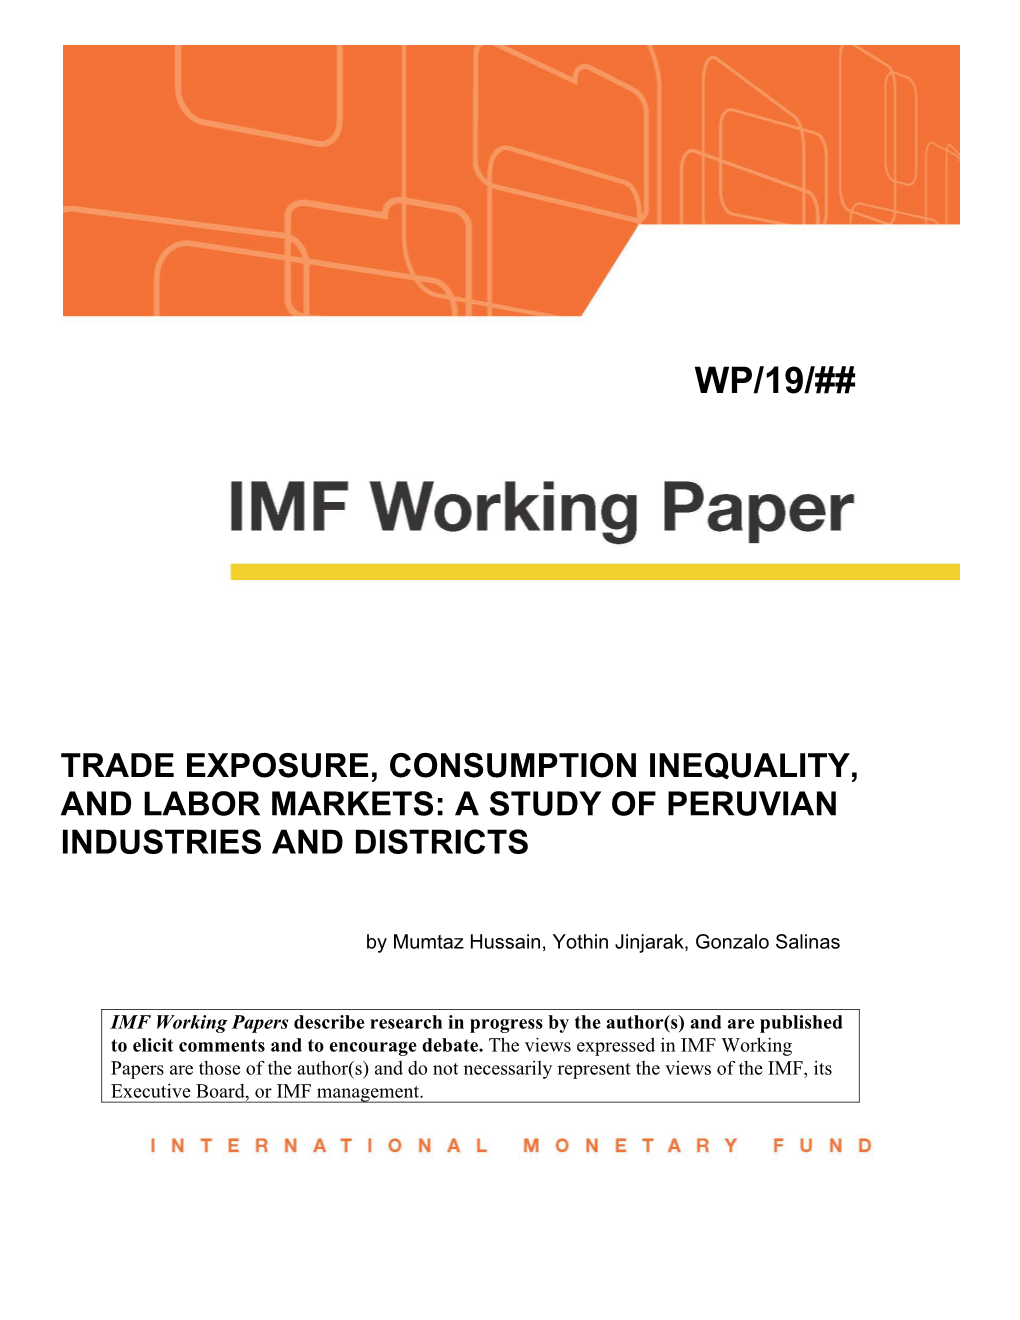 Trade Exposure, Consumption Inequality, and Labor Markets: a Study of Peruvian Industries and Districts